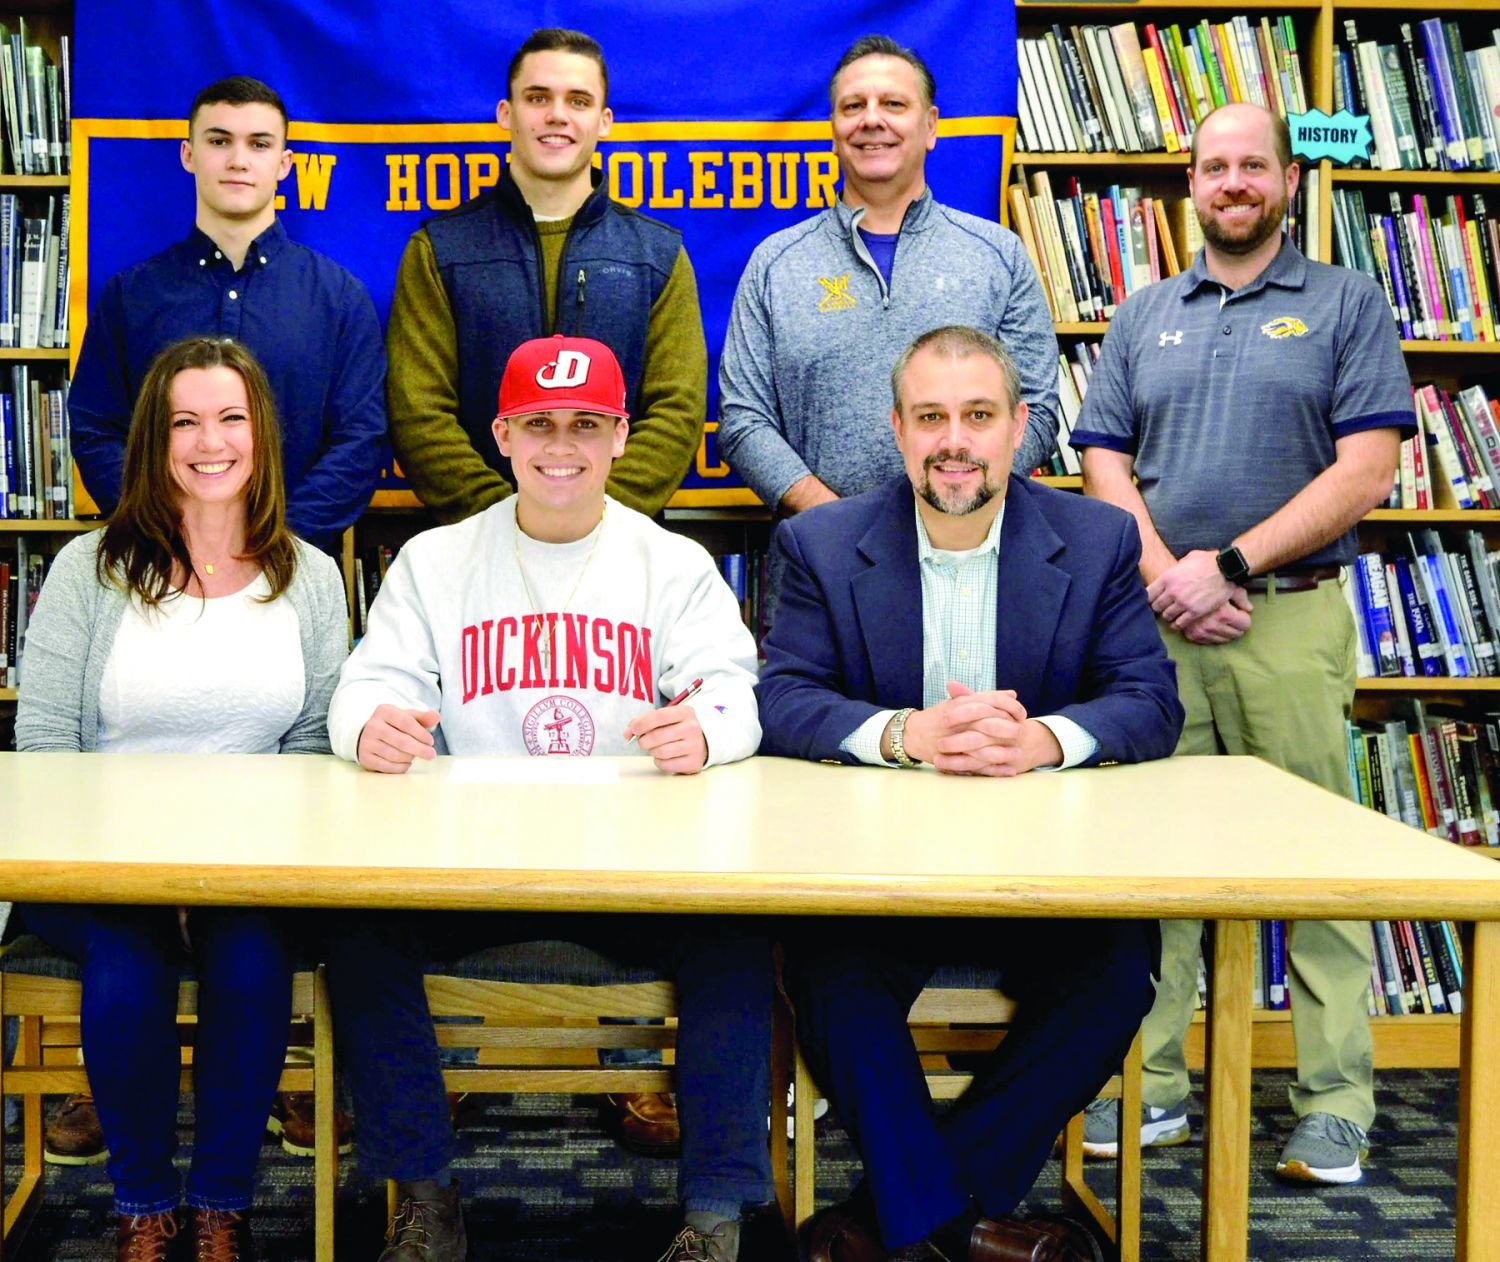 New Hope-Solebury baseball player Derek Smith, seated, center, recently signed his letter of intent to attend Dickinson College. Joining the senior at the signing ceremony are his family members, mother Sherry Smith, father Brian Smith, and brothers Kyle Smith and Brandon Smith; New Hope-Solebury baseball coach Tony Vlahovic and Assistant Athletic Director Kris Foulke.